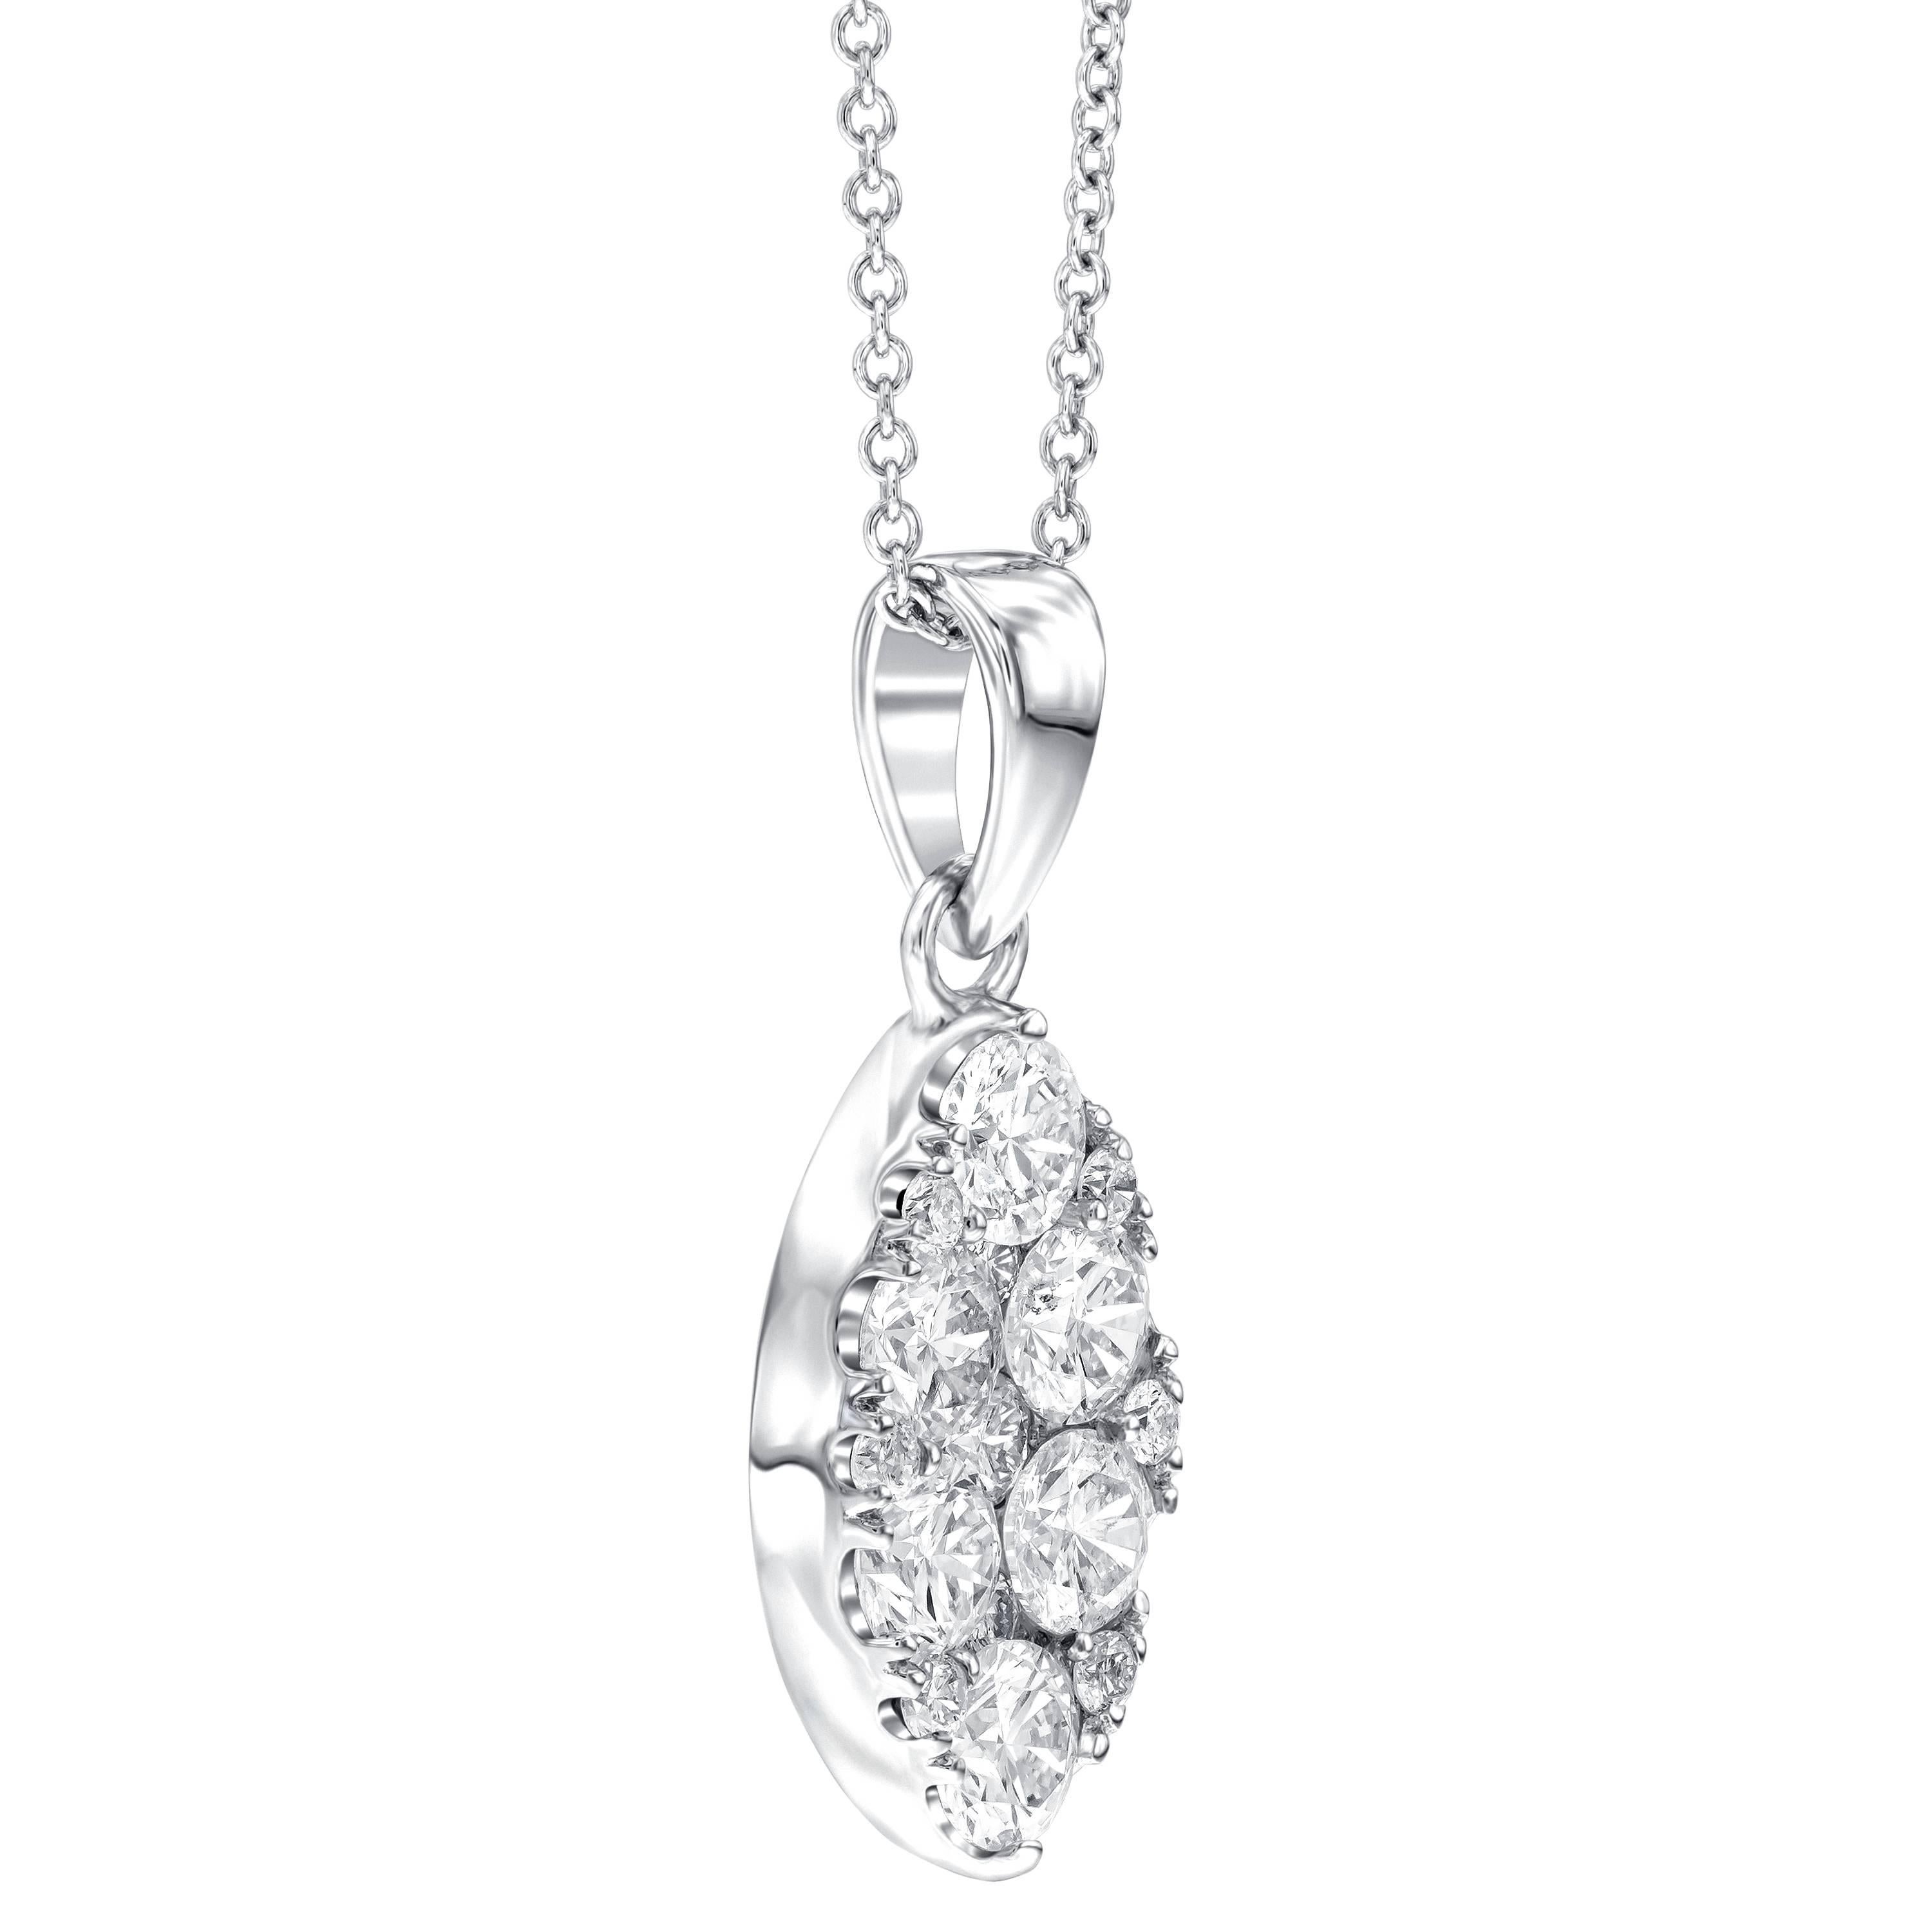 A gorgeous 1.00ct claw set Marquise shaped pendant, inlaid with various size Diamonds this pendant has a unique studded finish that really captures the light. Set in 18ct White Gold which enhances the brilliance of the H-SI white diamonds. This